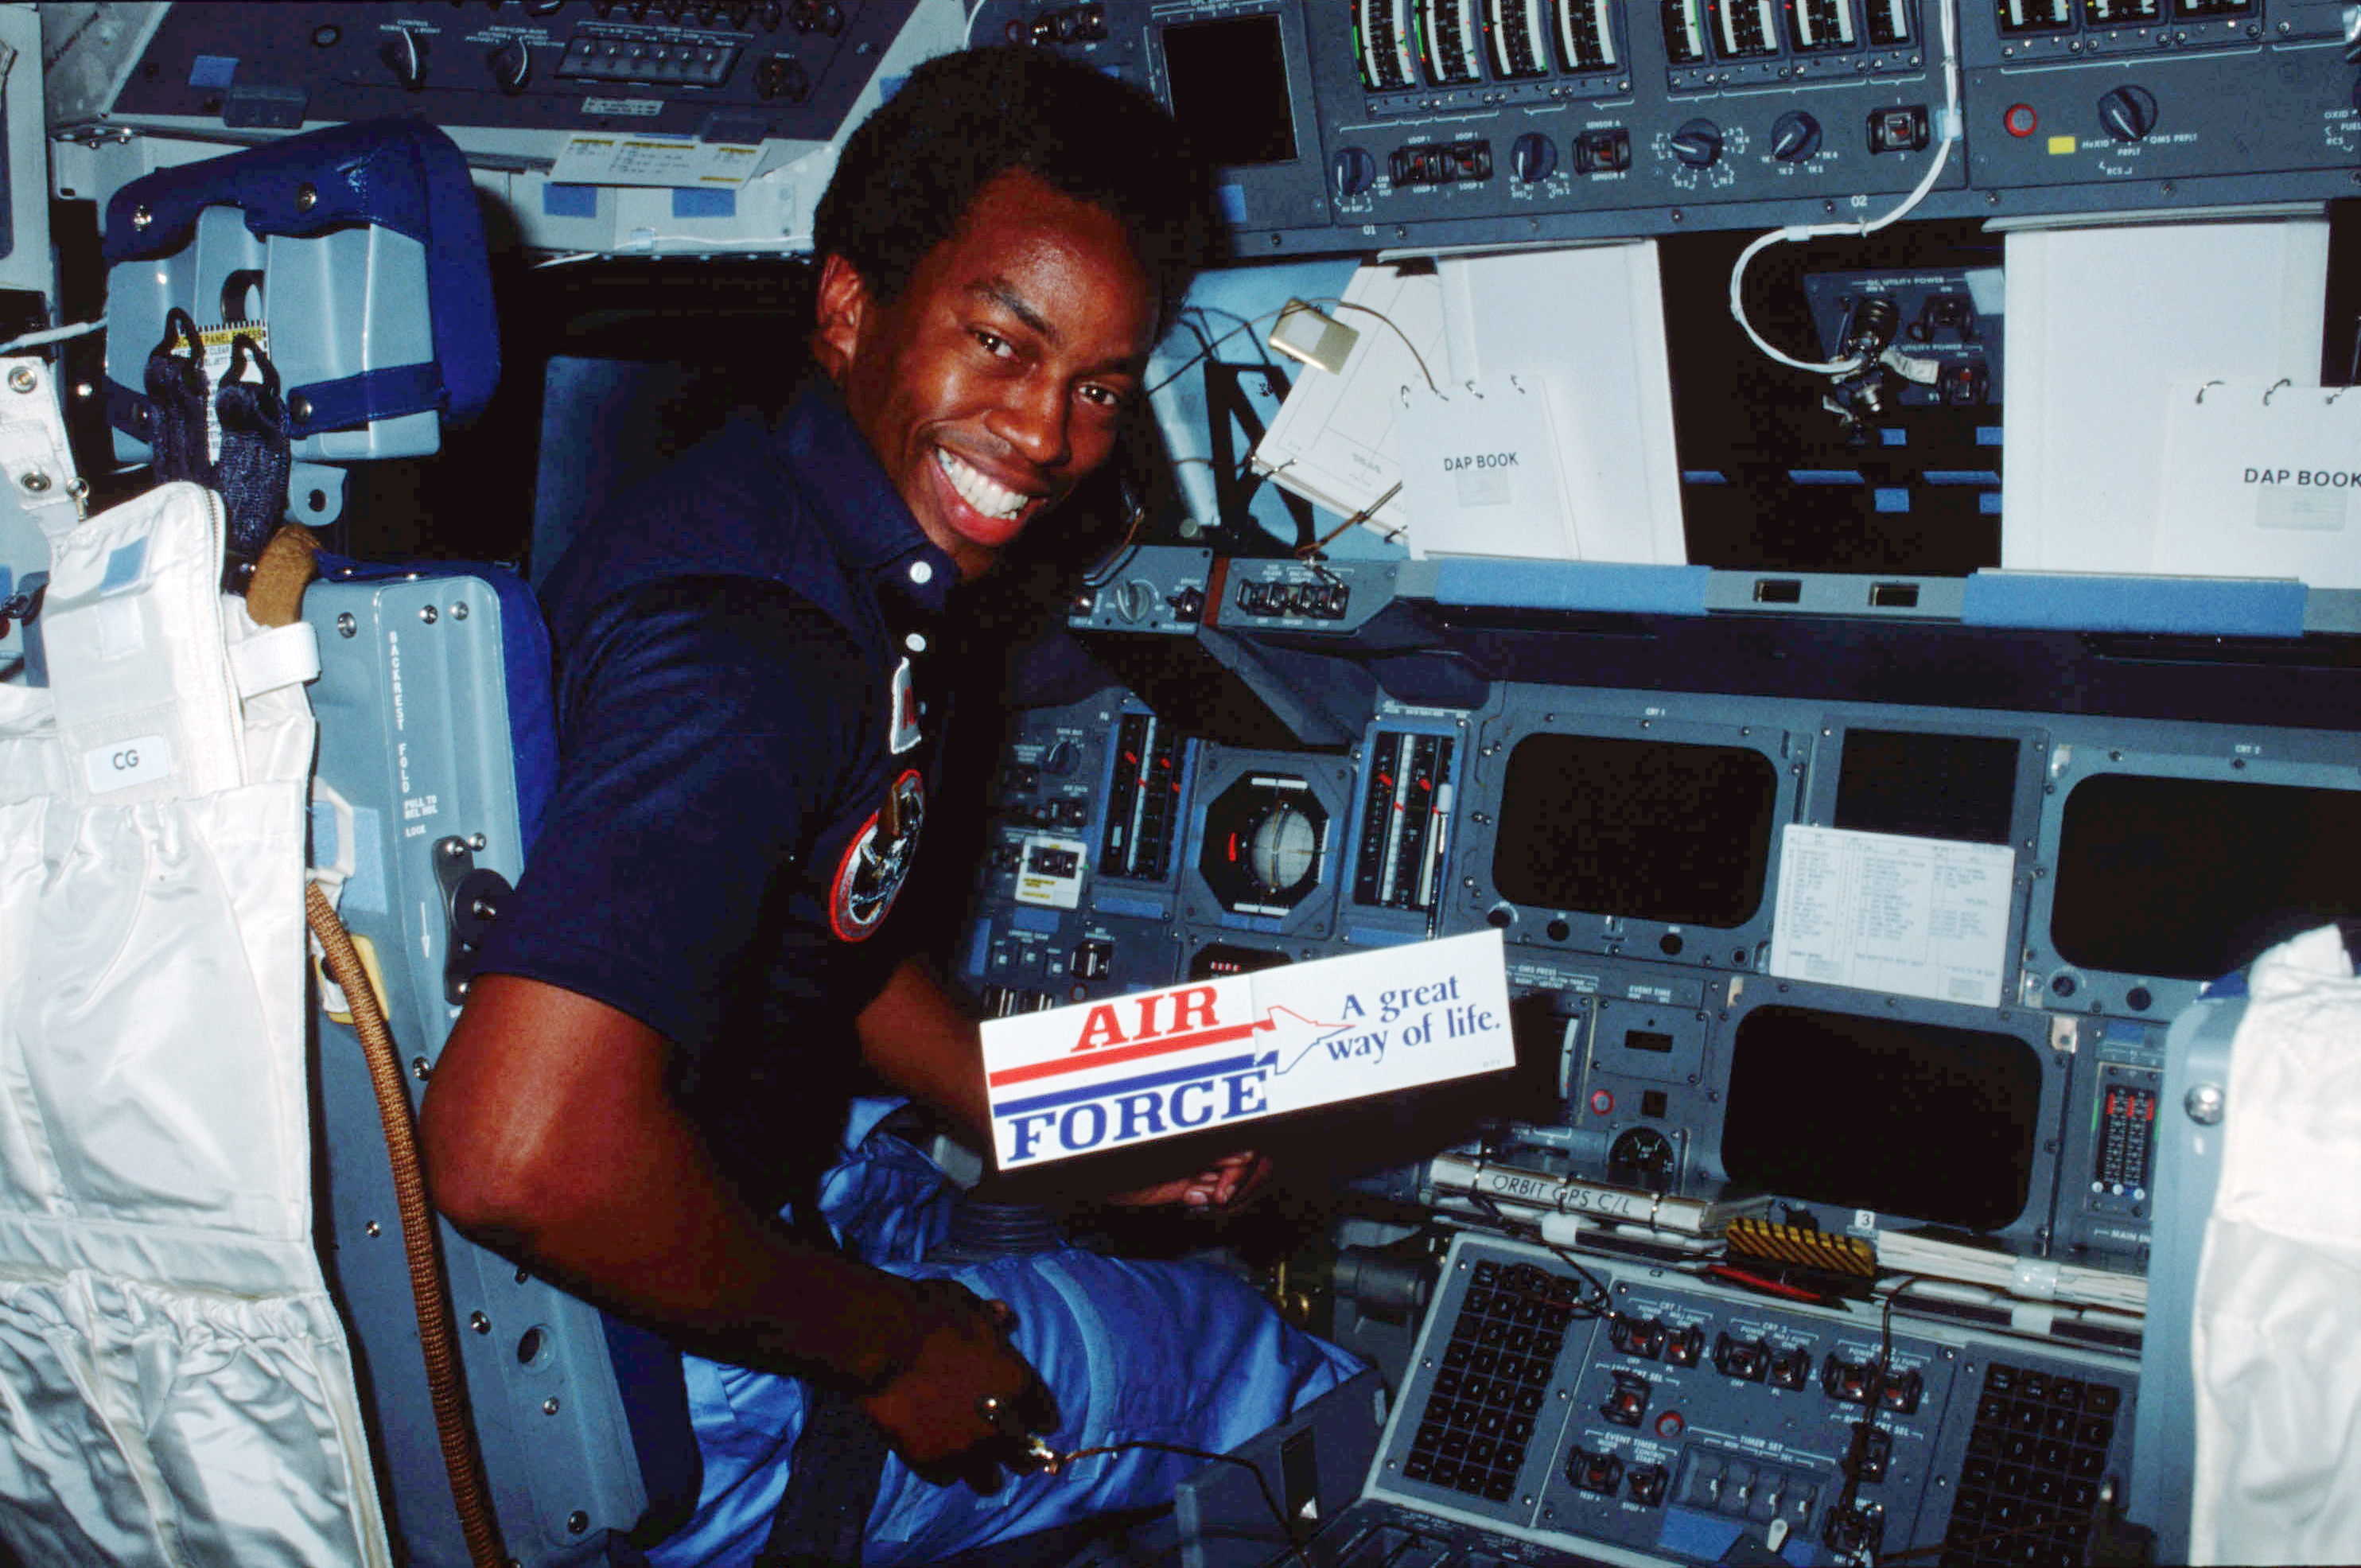 Guy Bluford on STS-8 poses with a Air Force bumper ssticker